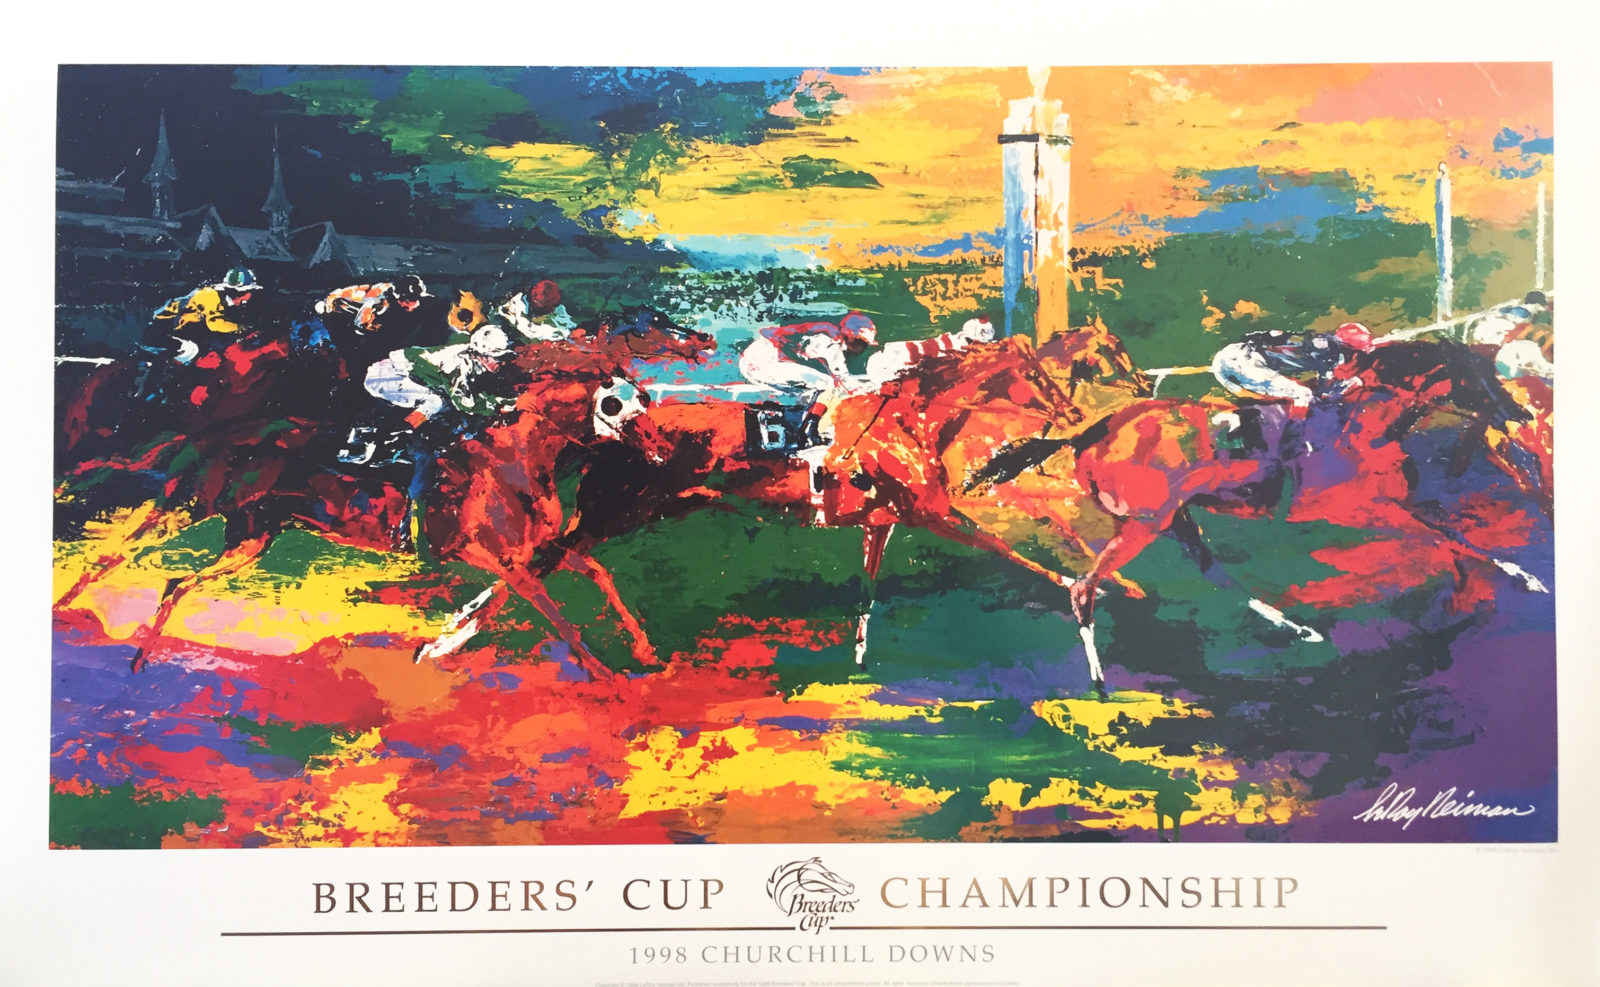 Breeders' Cup Championship poster